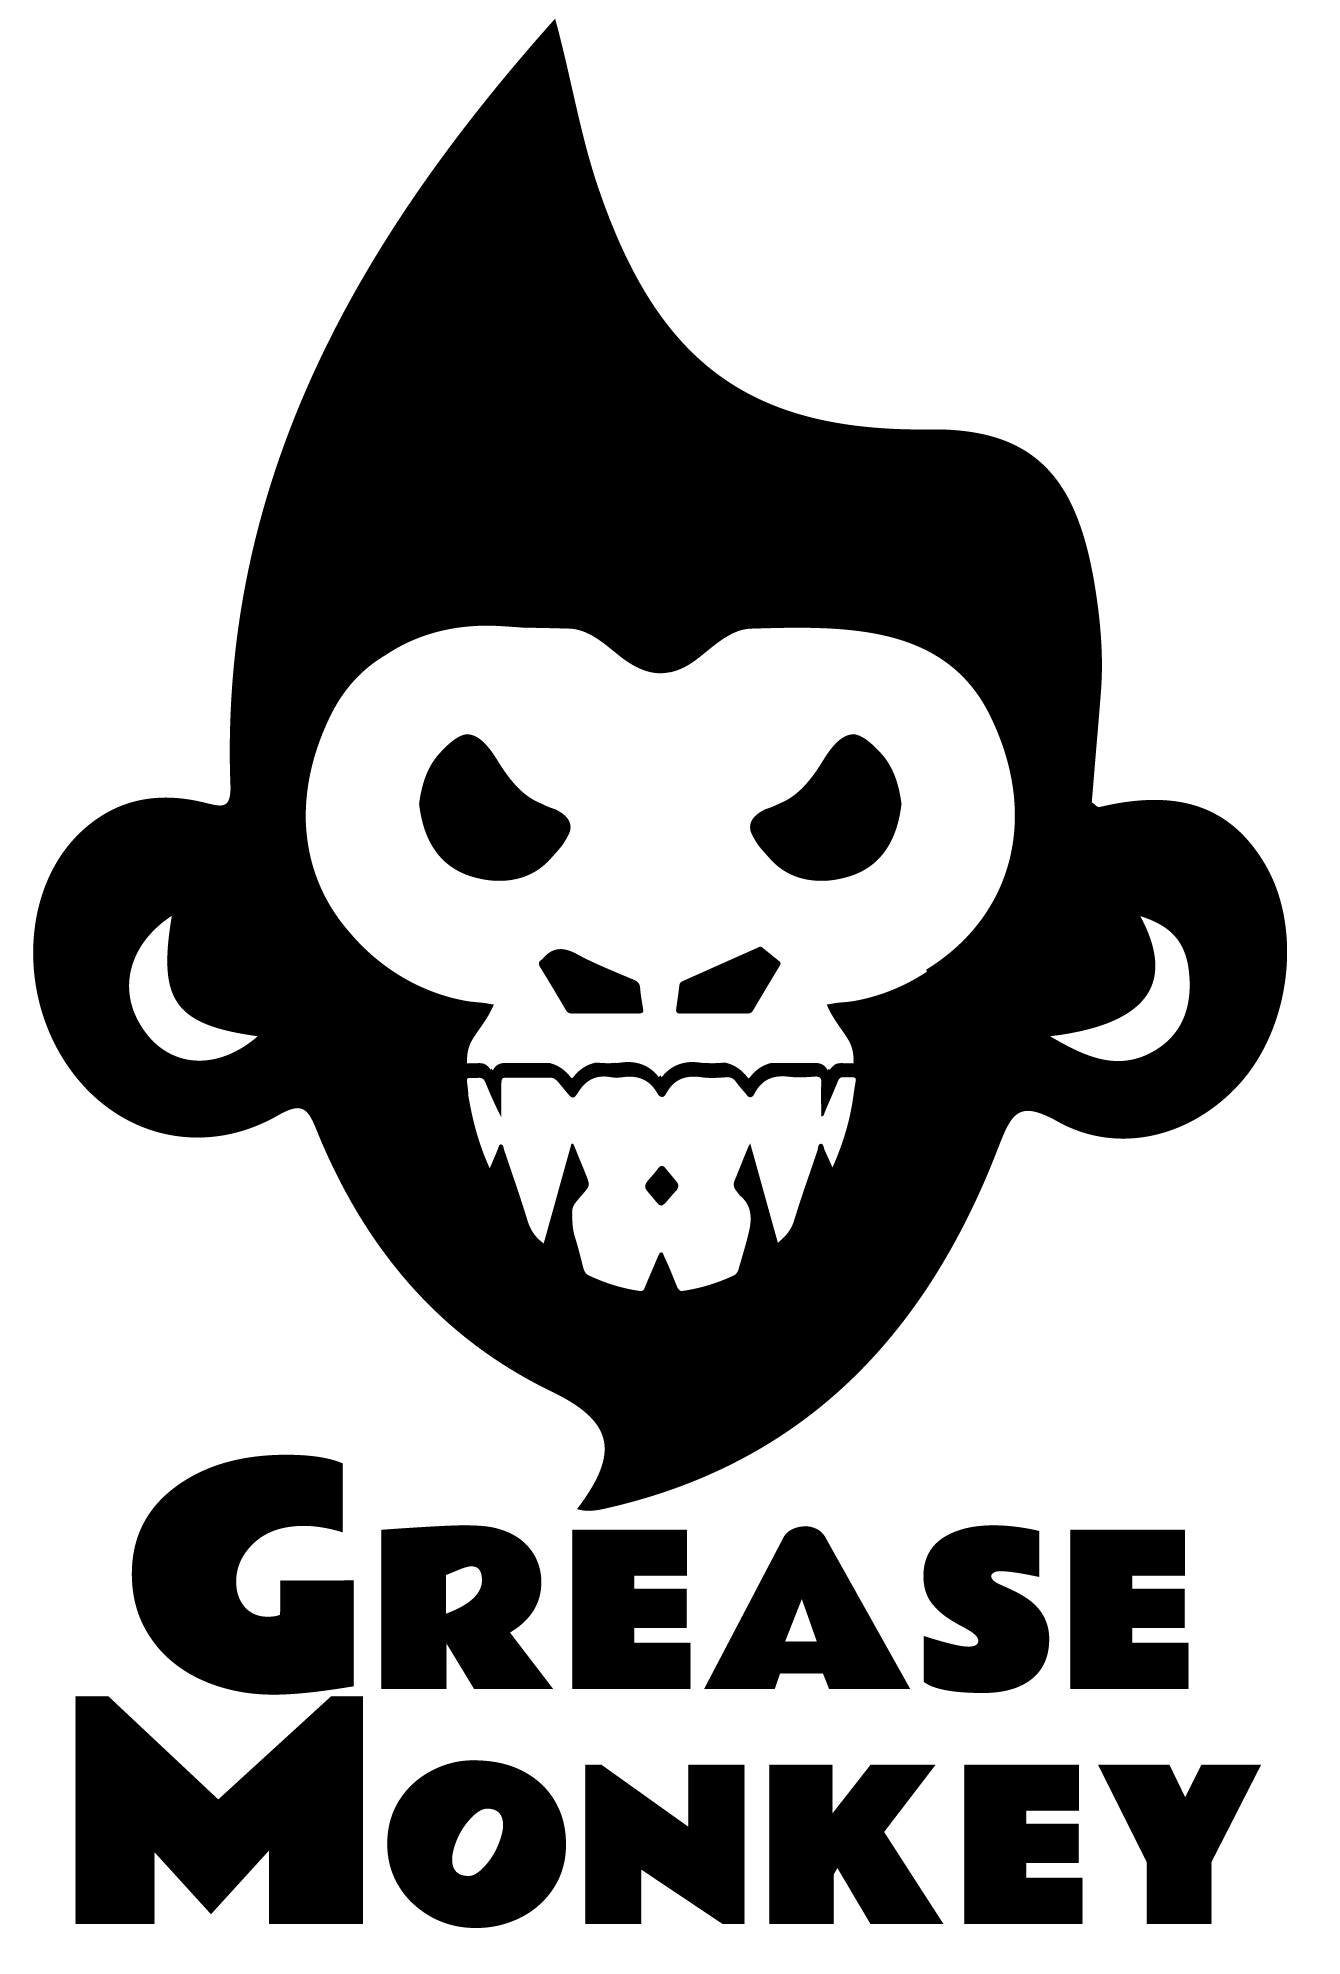 Grease Monkey | Designs by Keith